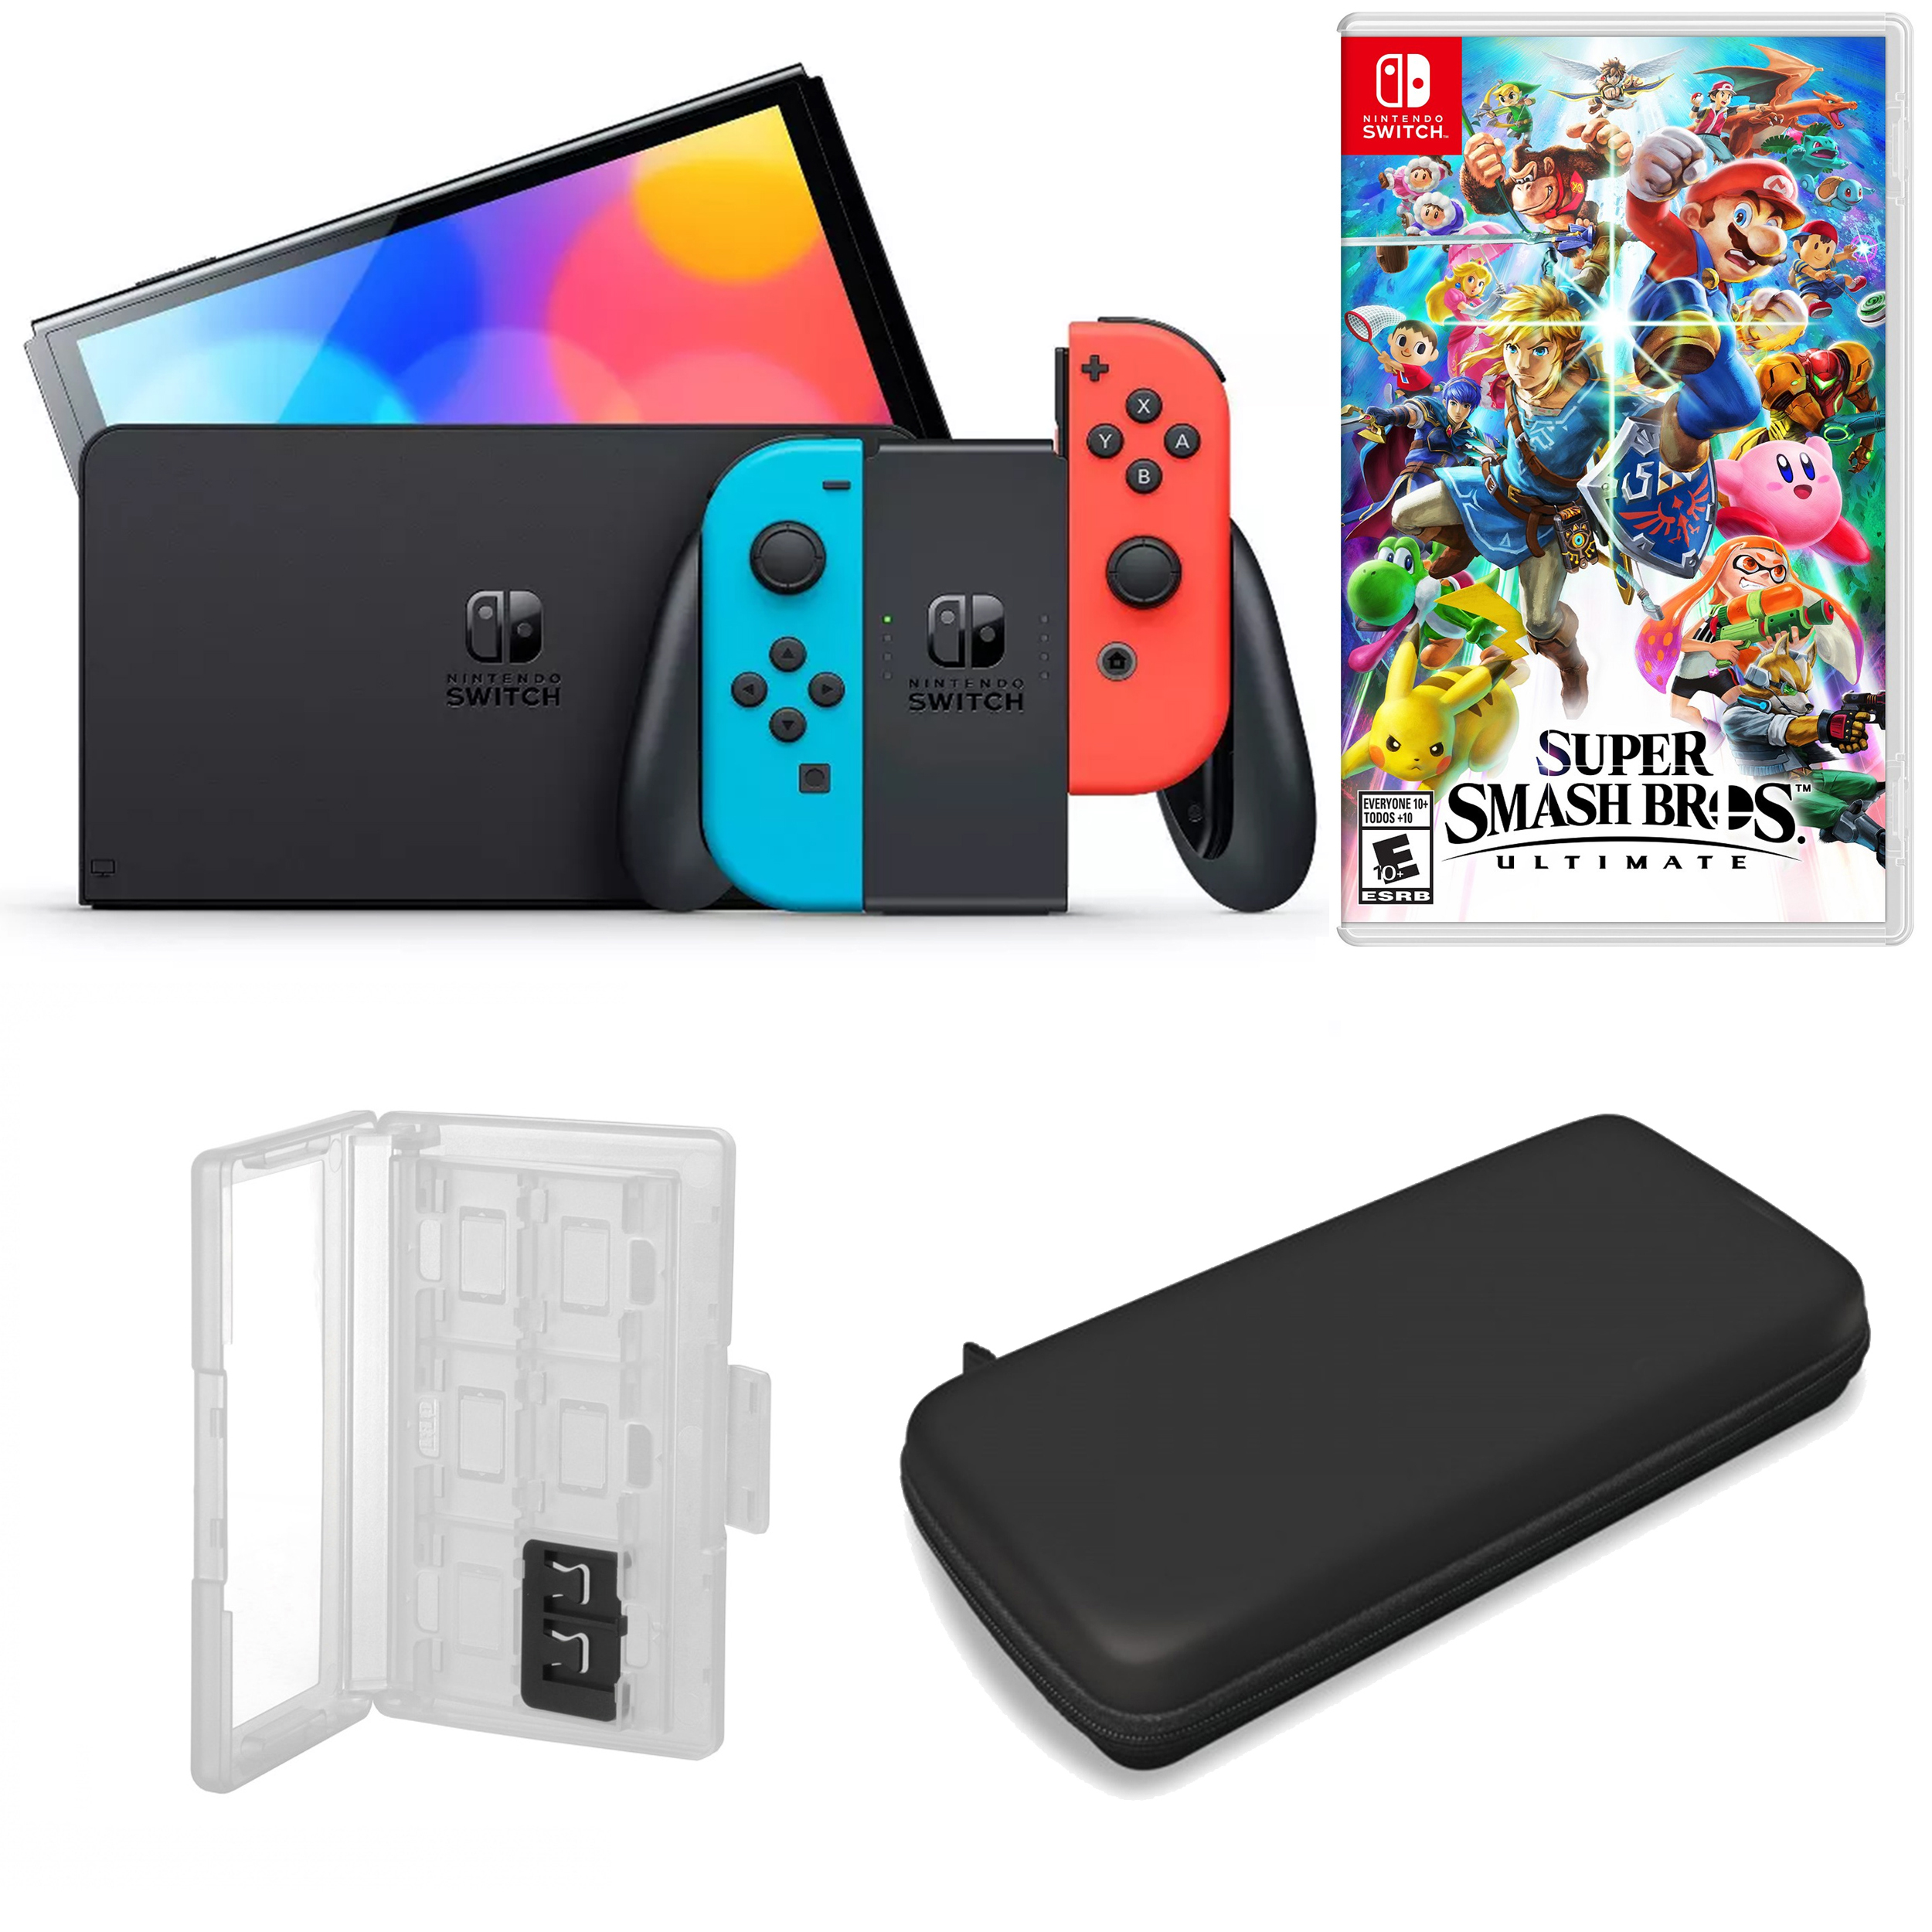 Nintendo Switch OLED in Neon with Super Smash Bros 3 and Accessories